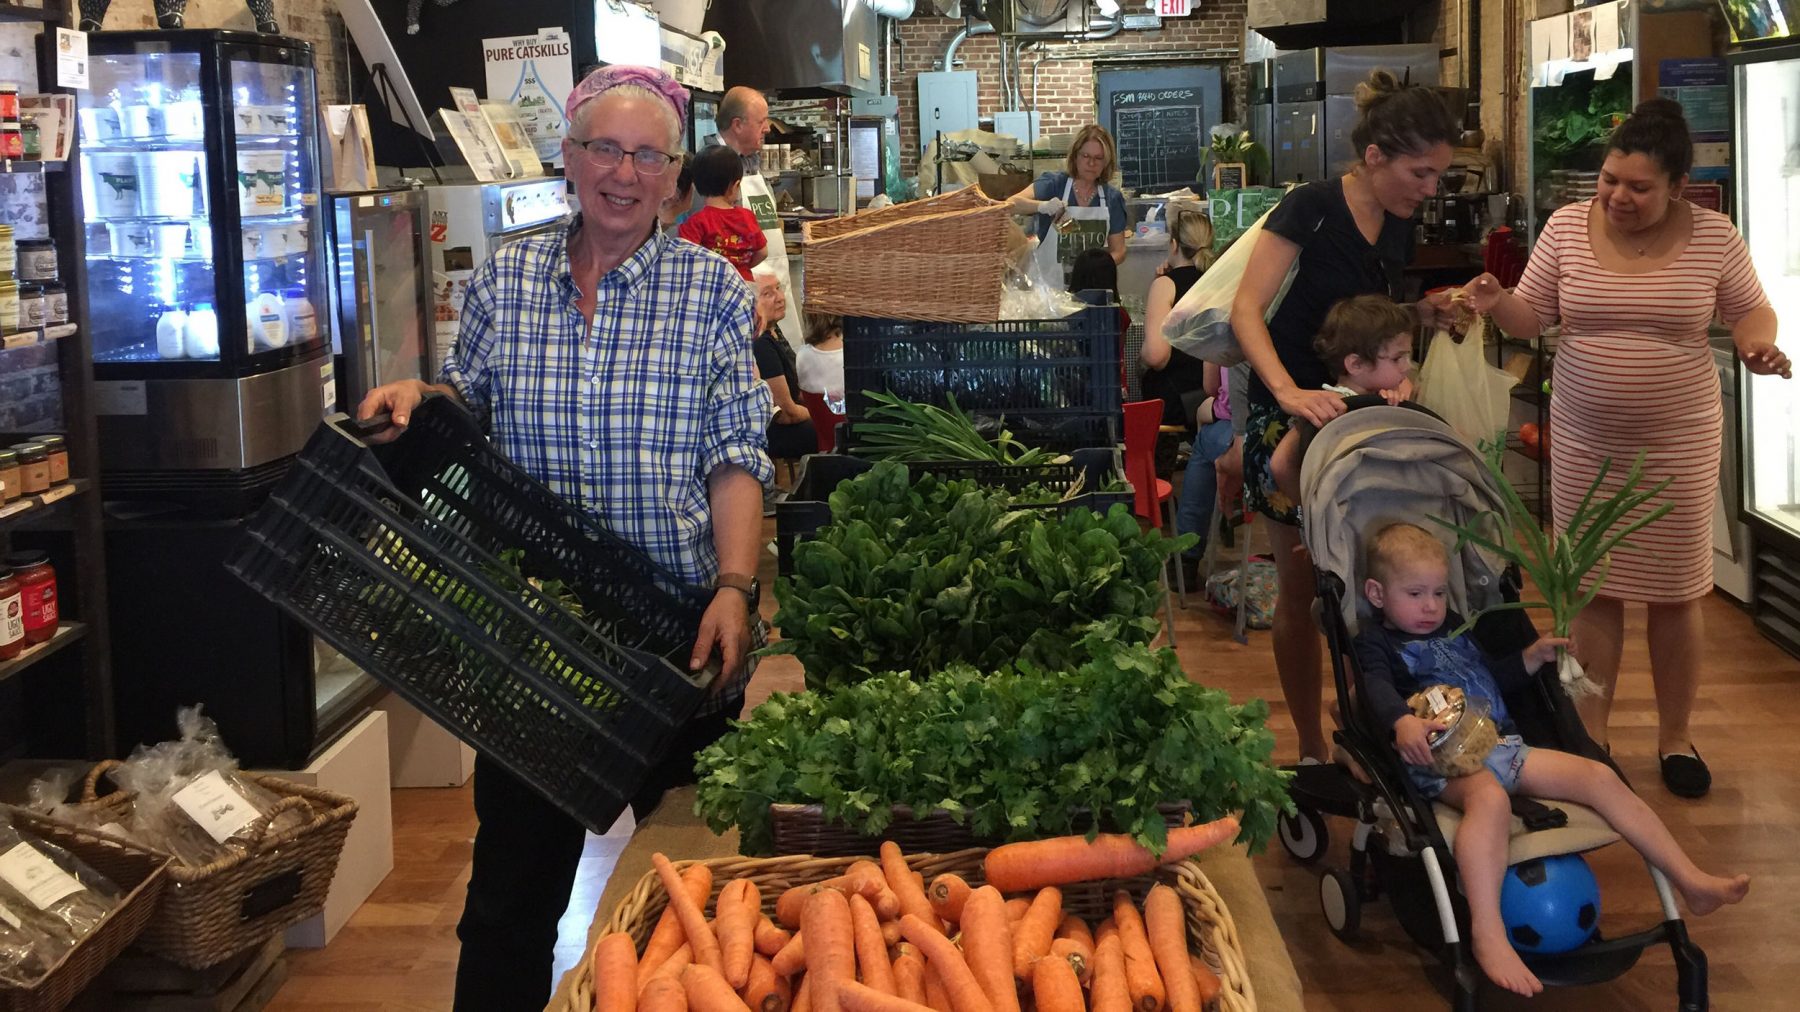 Winter Farm Share and cooking class at Fulton Stall Market